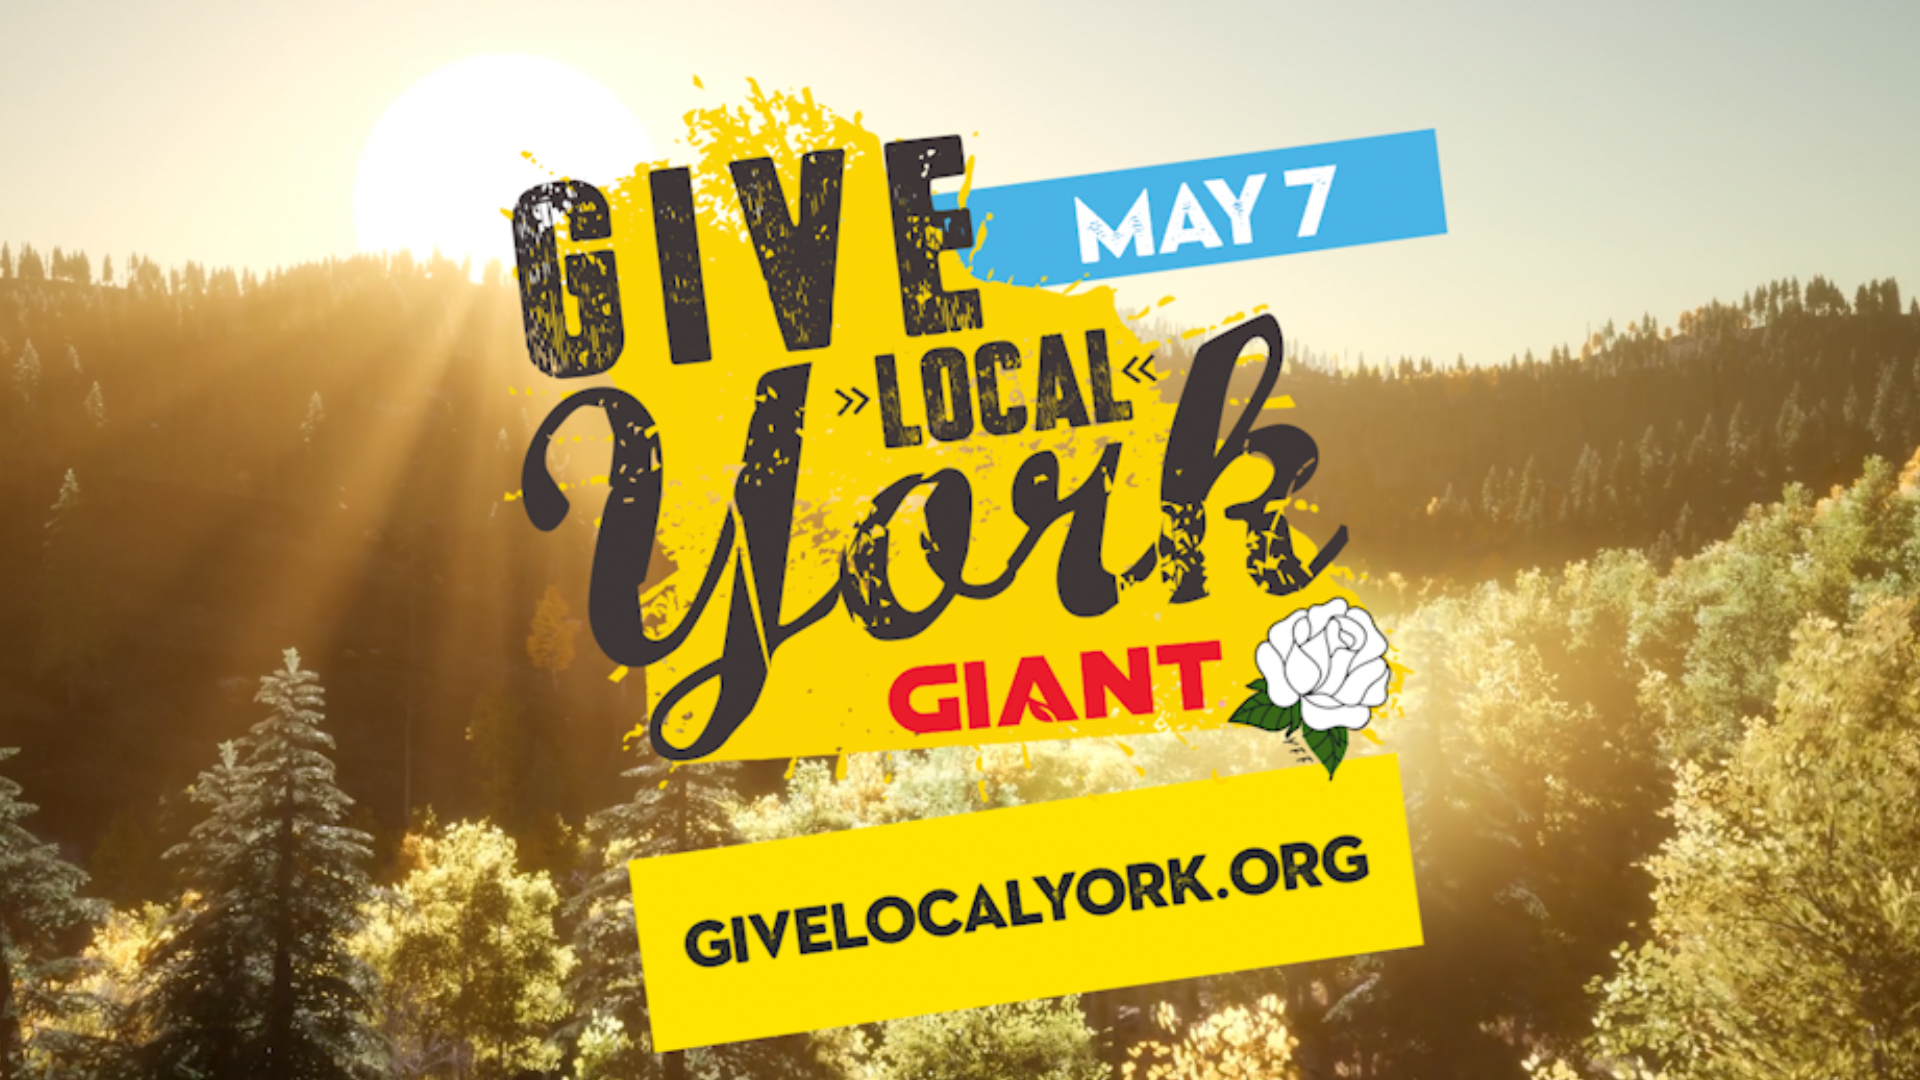 Give Local York organizer Meagan Given joined FOX43's Amy Lutz to discuss the county's biggest day of giving on May 7.